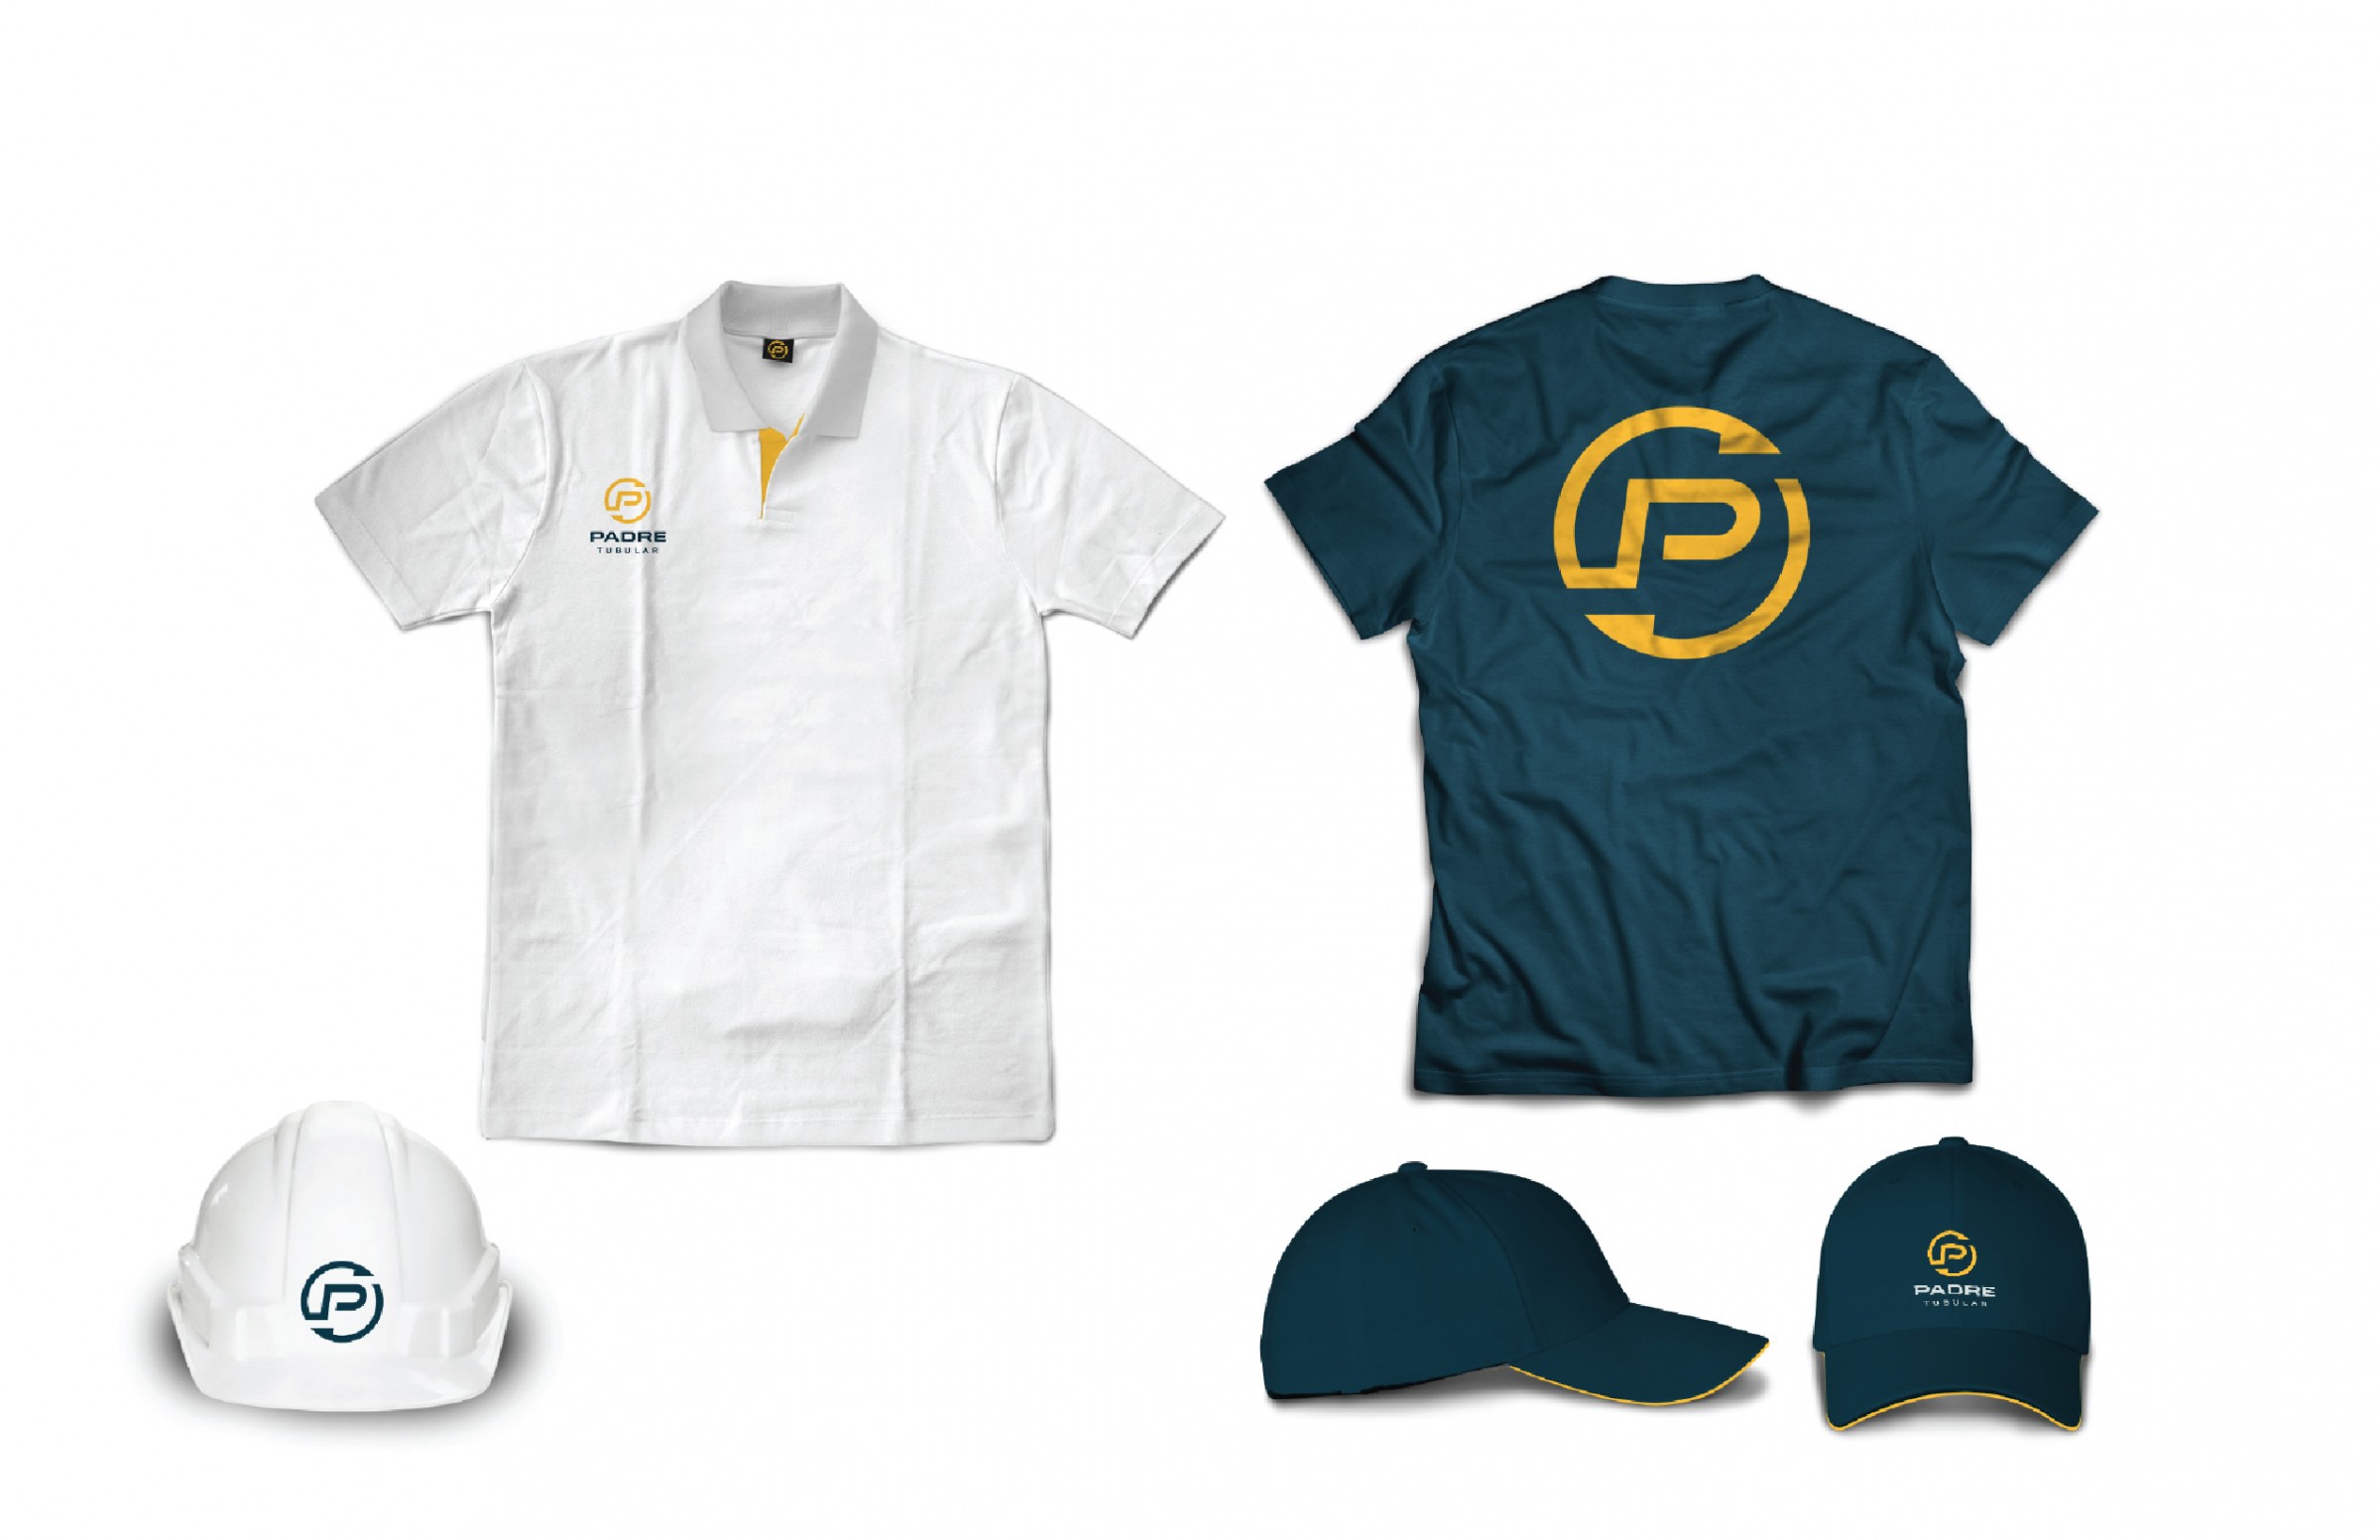 Showing apparel with the Padre Tubular logo.